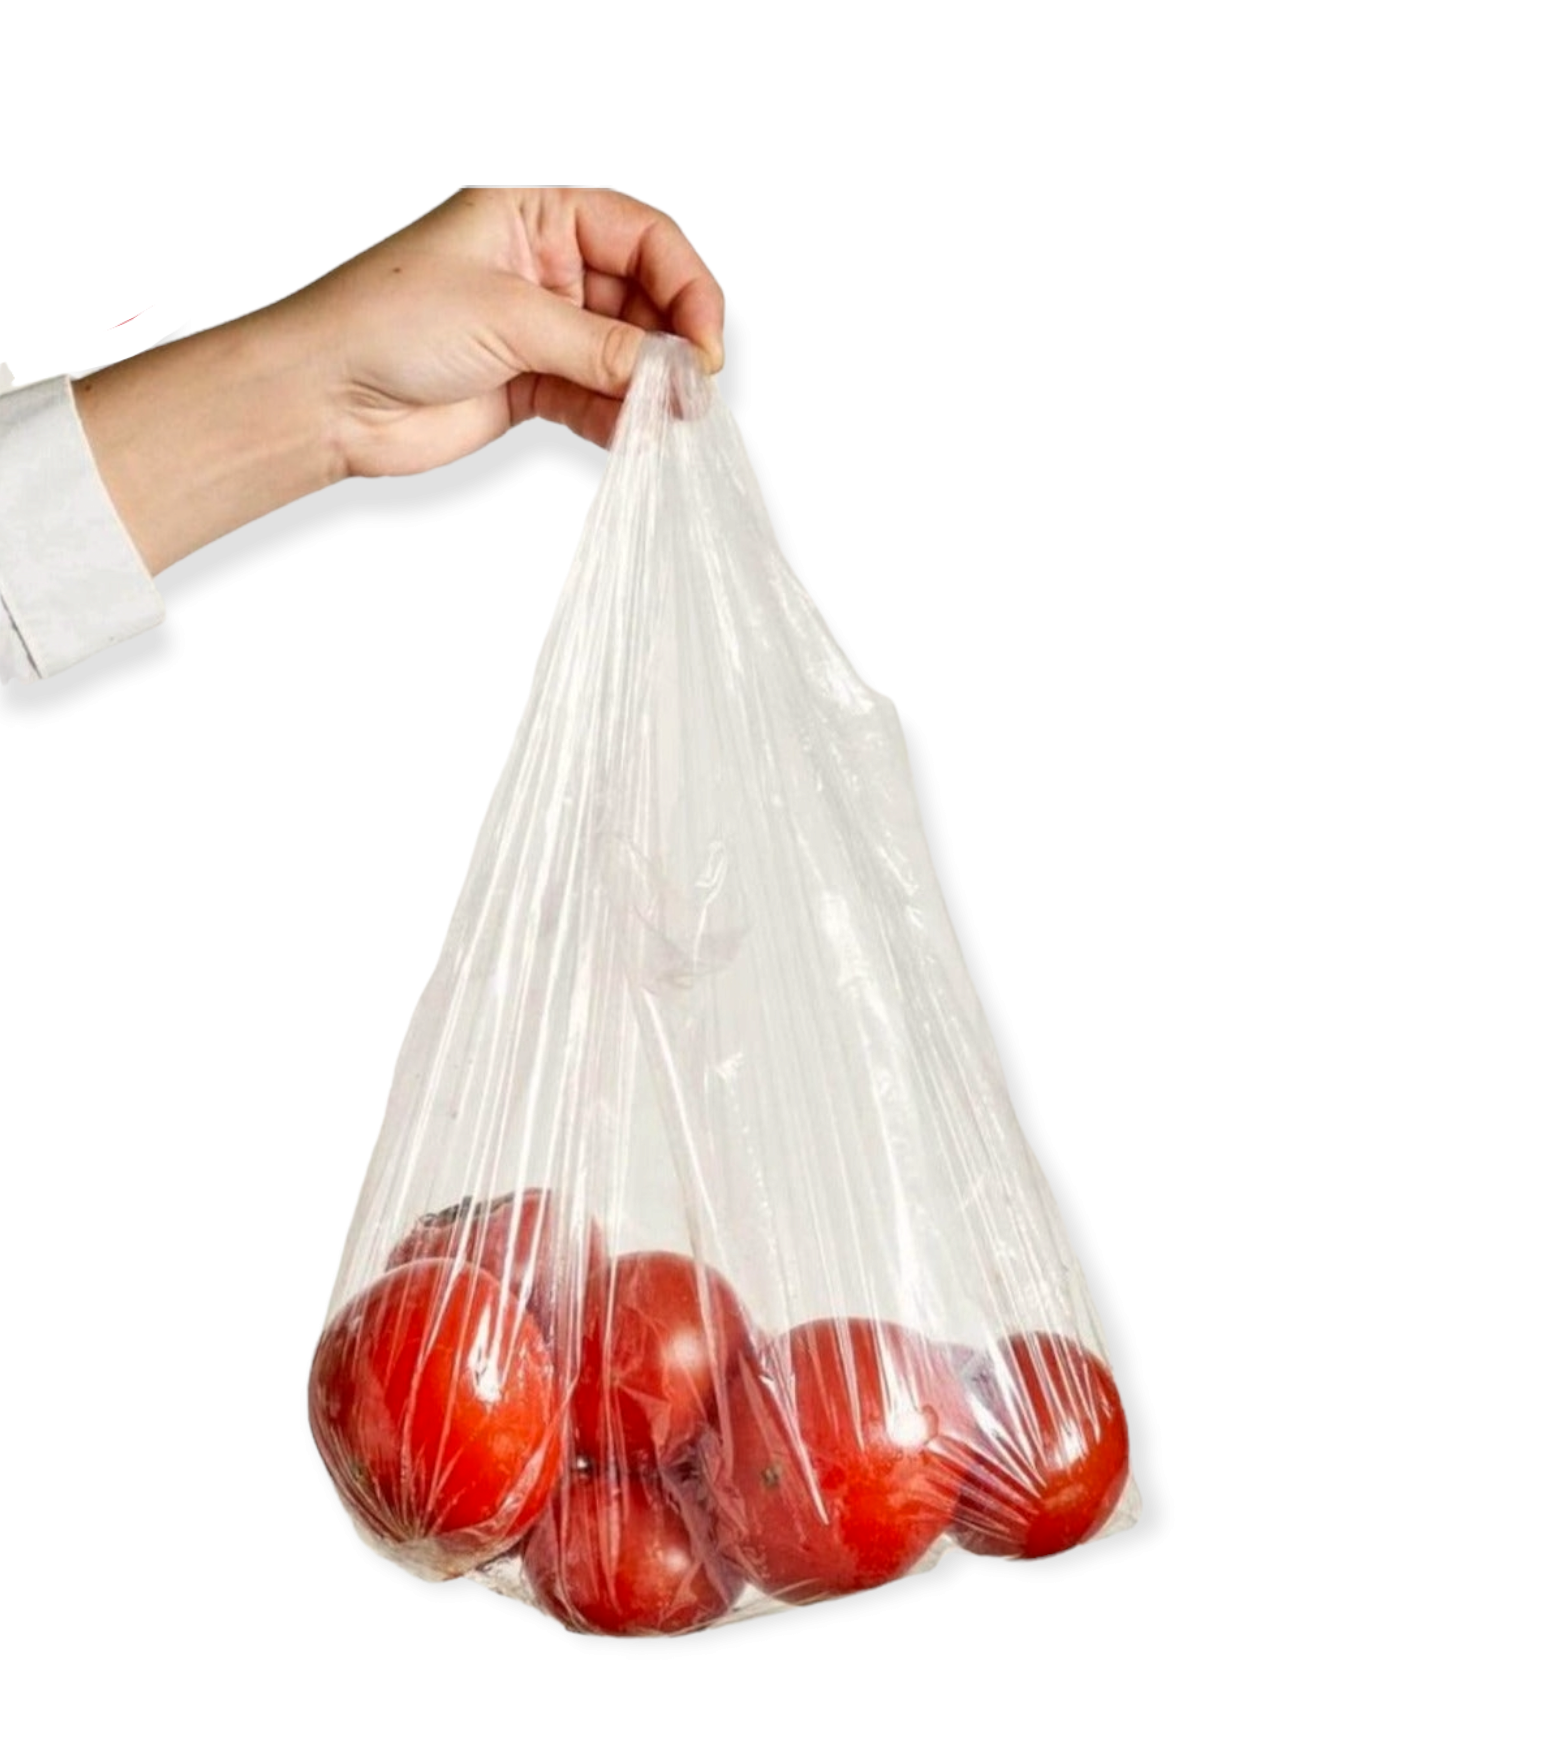 Handy Plastic Carrier Bags 12L Clear VTC 23/14x43cm 25microns 250pack